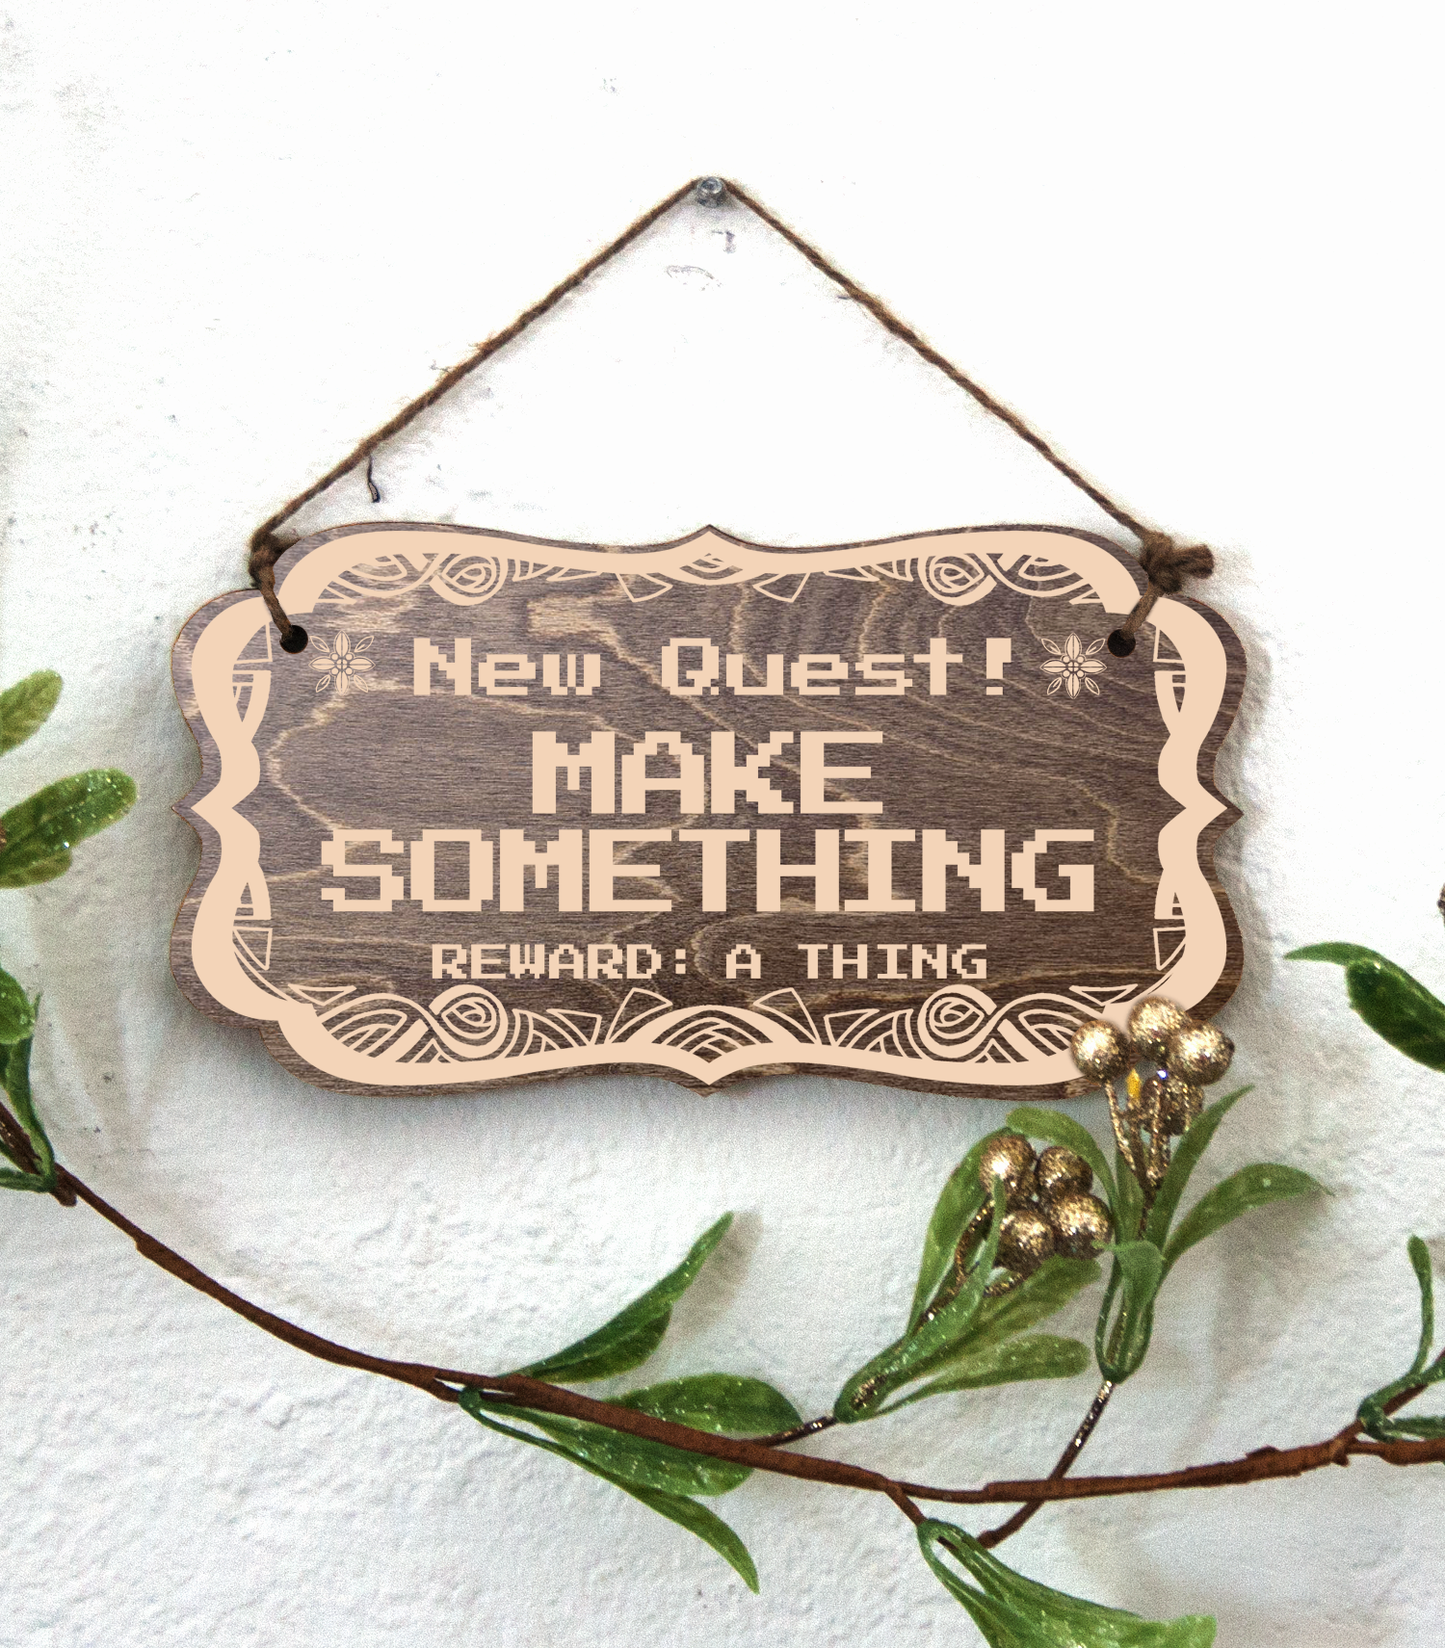 "New Quest: Make Something, Reward: A Thing" Wood Sign